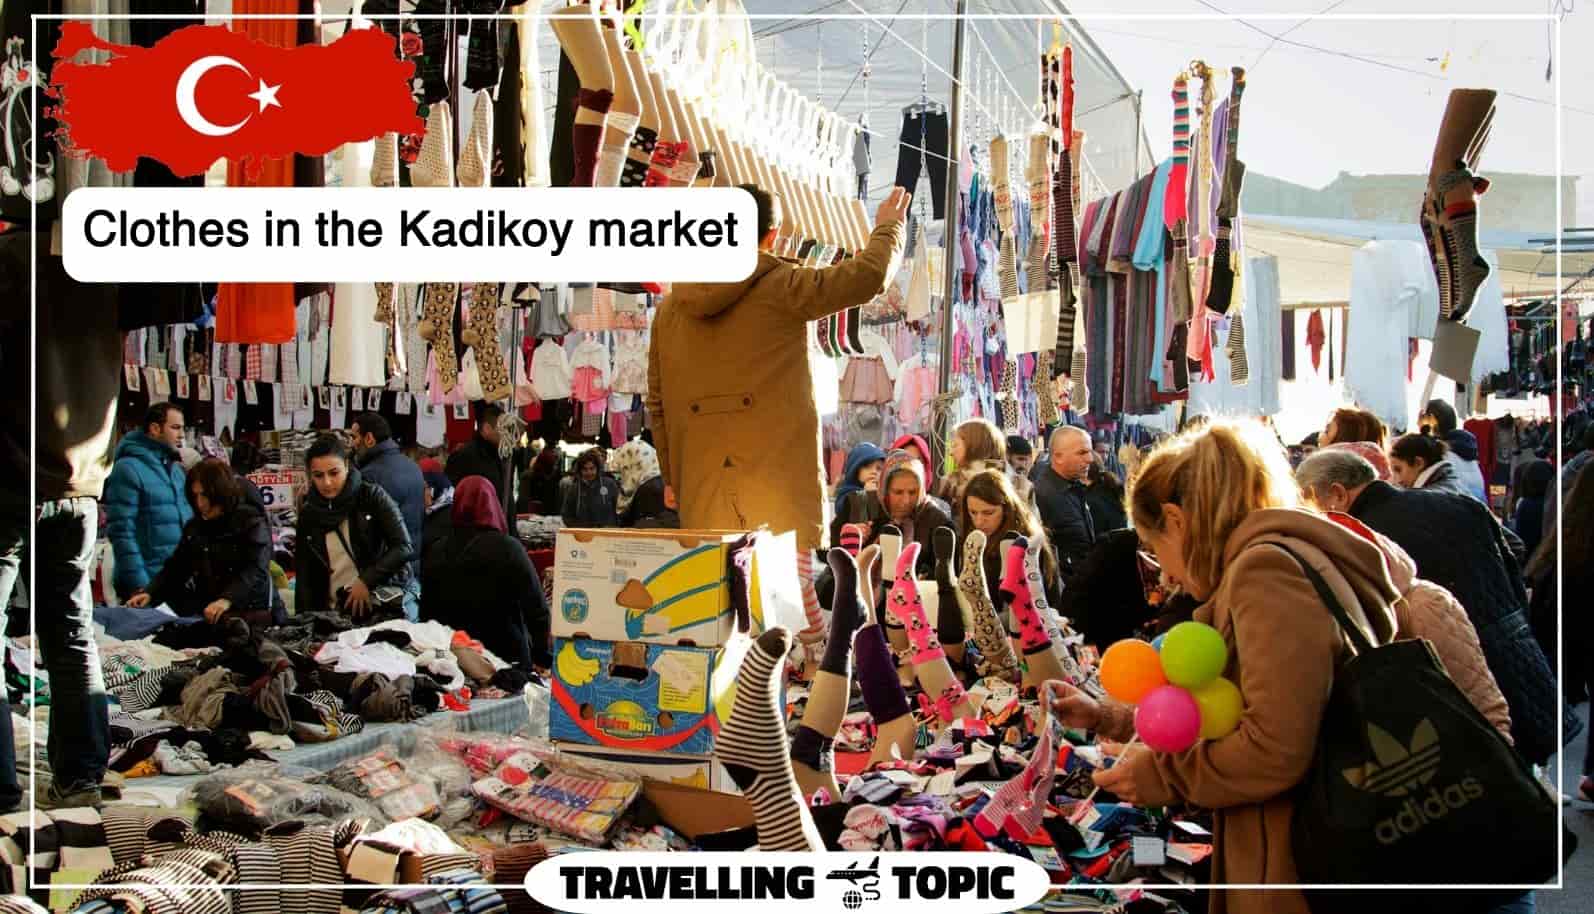 Clothes in the Kadikoy market